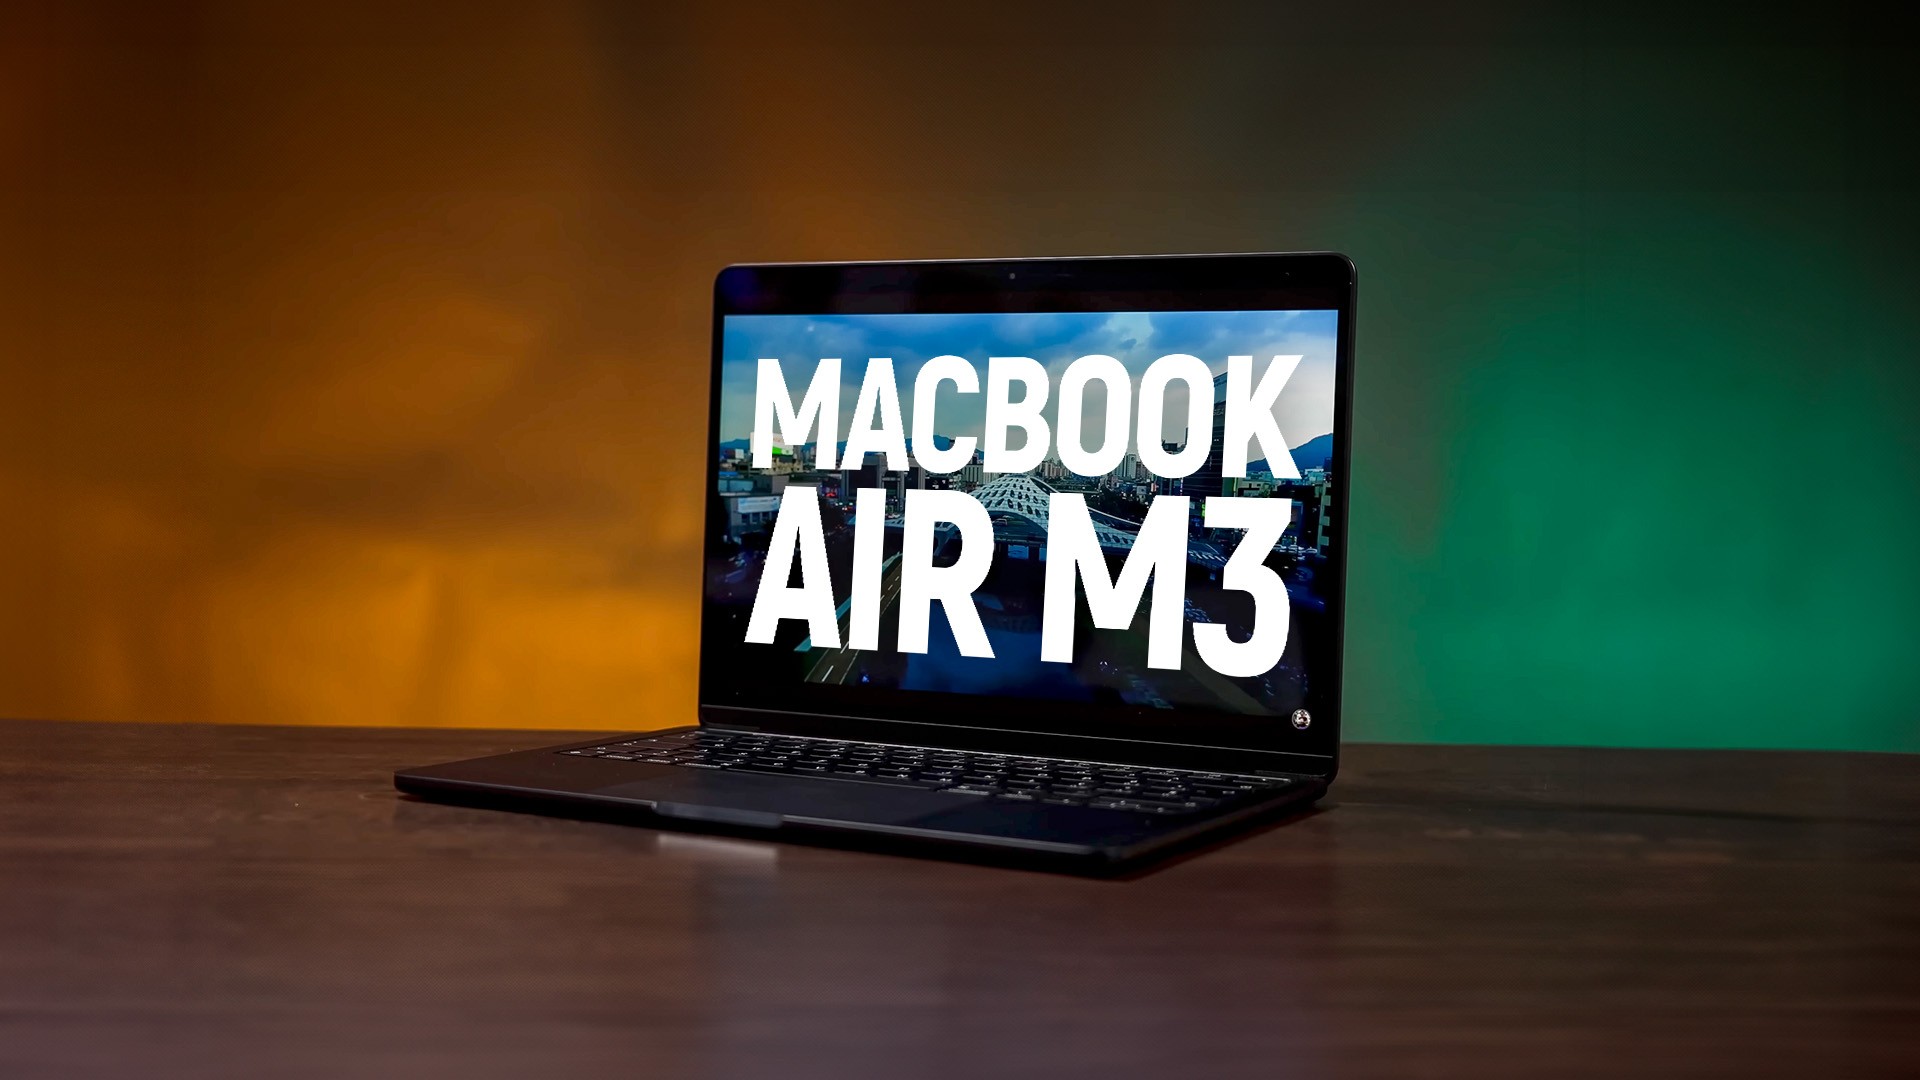 Apple MacBook Air M3: Is the new chip worth the price or is it better to get the M1?  |  Practical video training